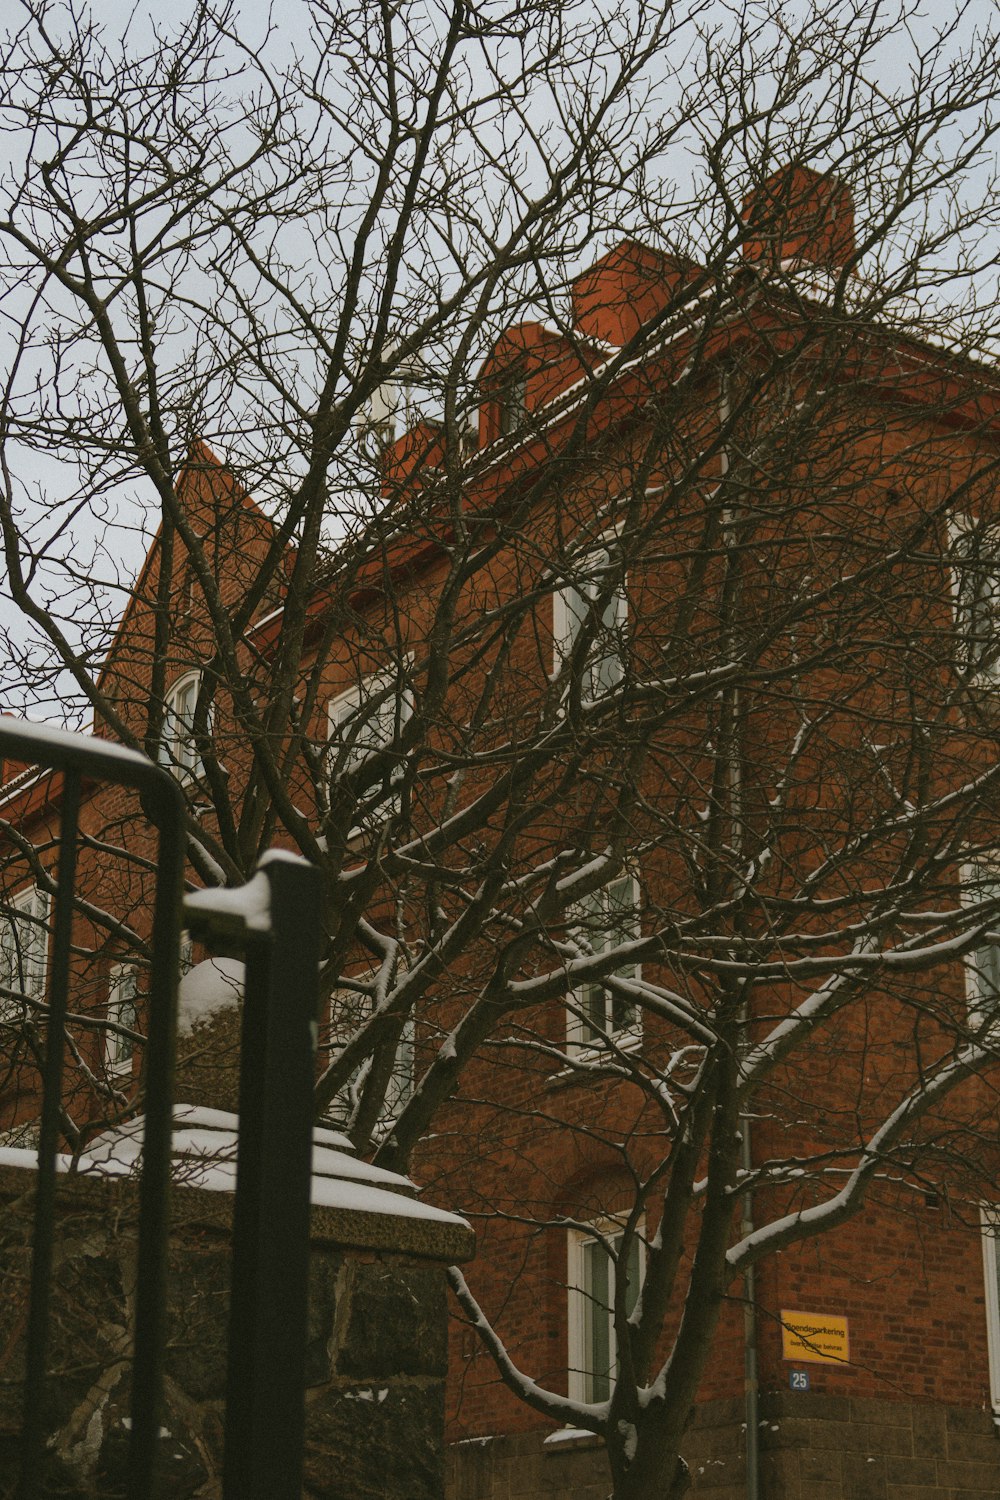 a red brick building with snow on the ground